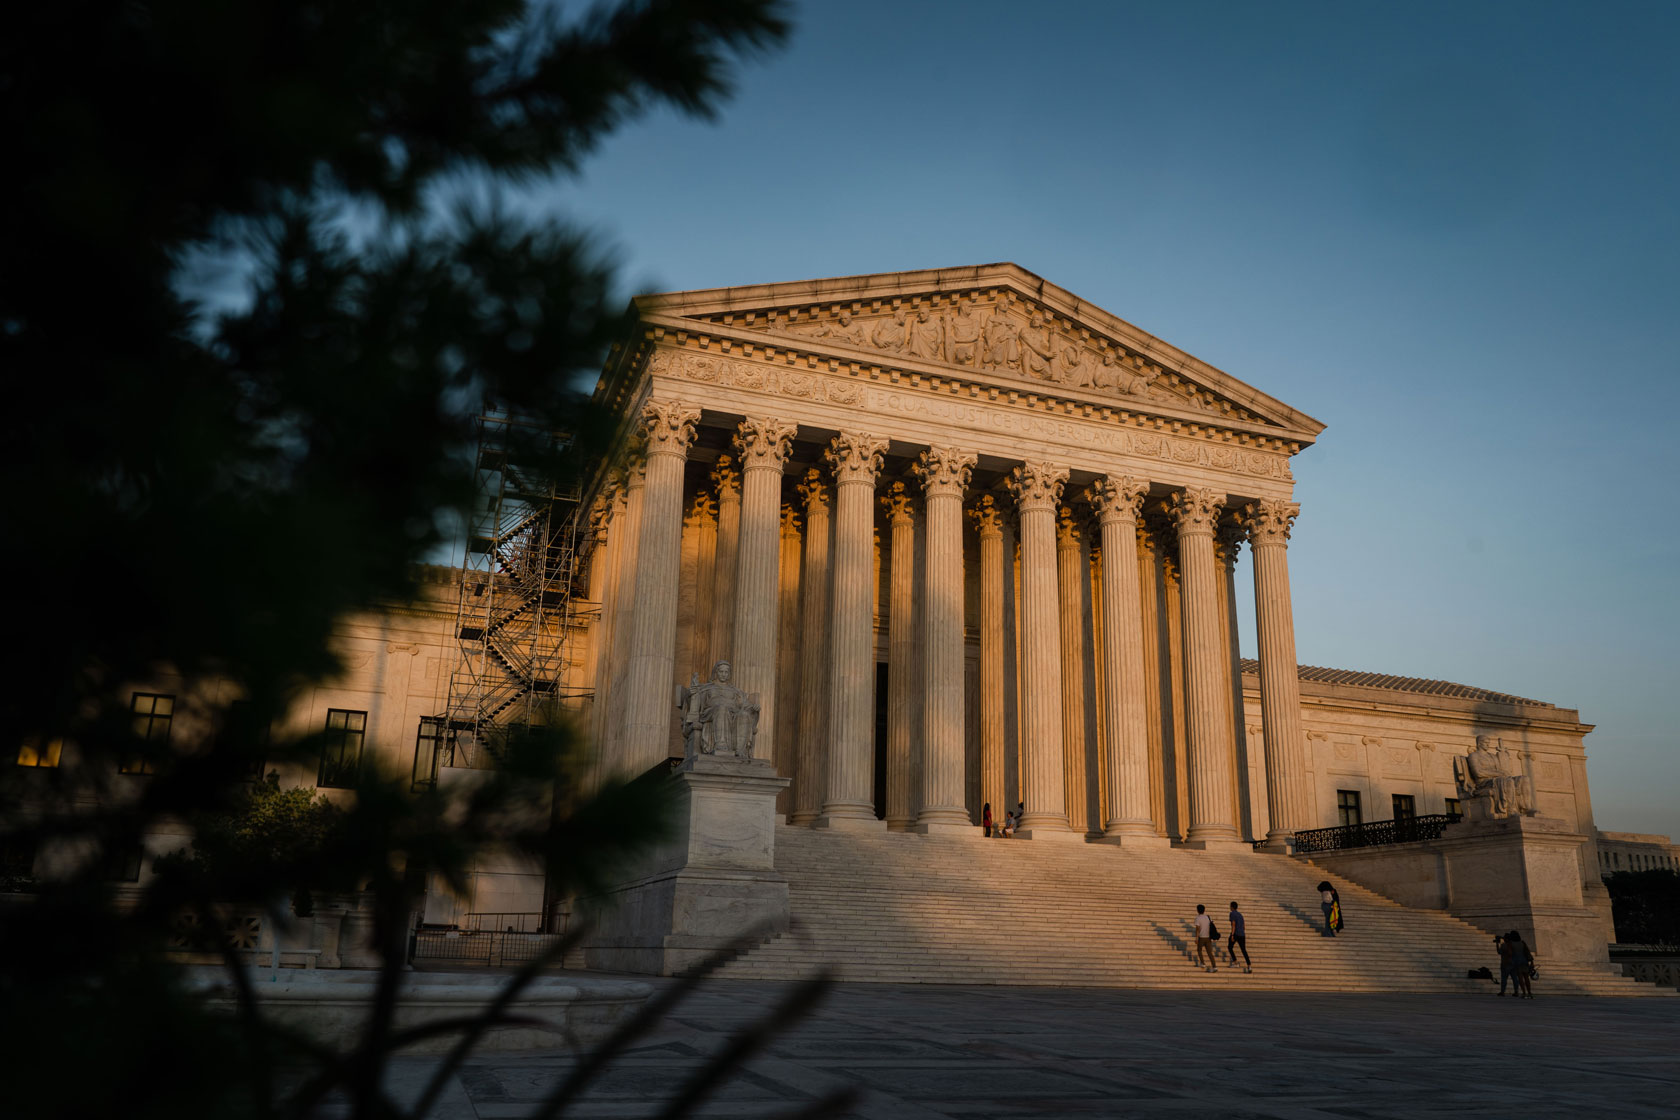 The U.S. Supreme Court building is seen with sunlight shining on it and a tree shadowing the foreground.